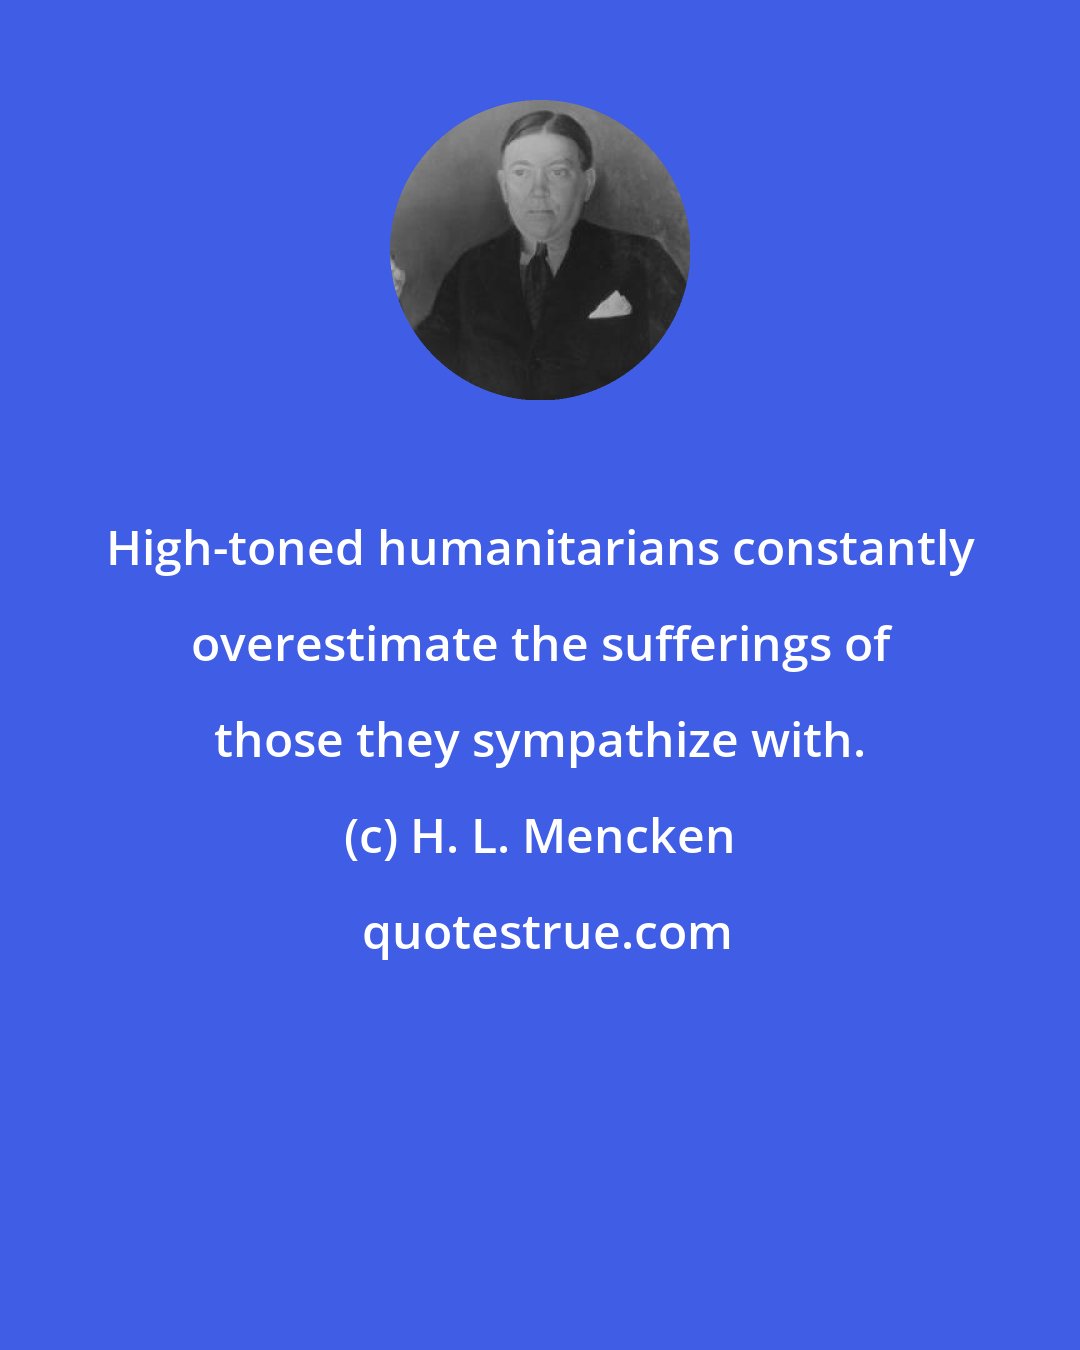 H. L. Mencken: High-toned humanitarians constantly overestimate the sufferings of those they sympathize with.